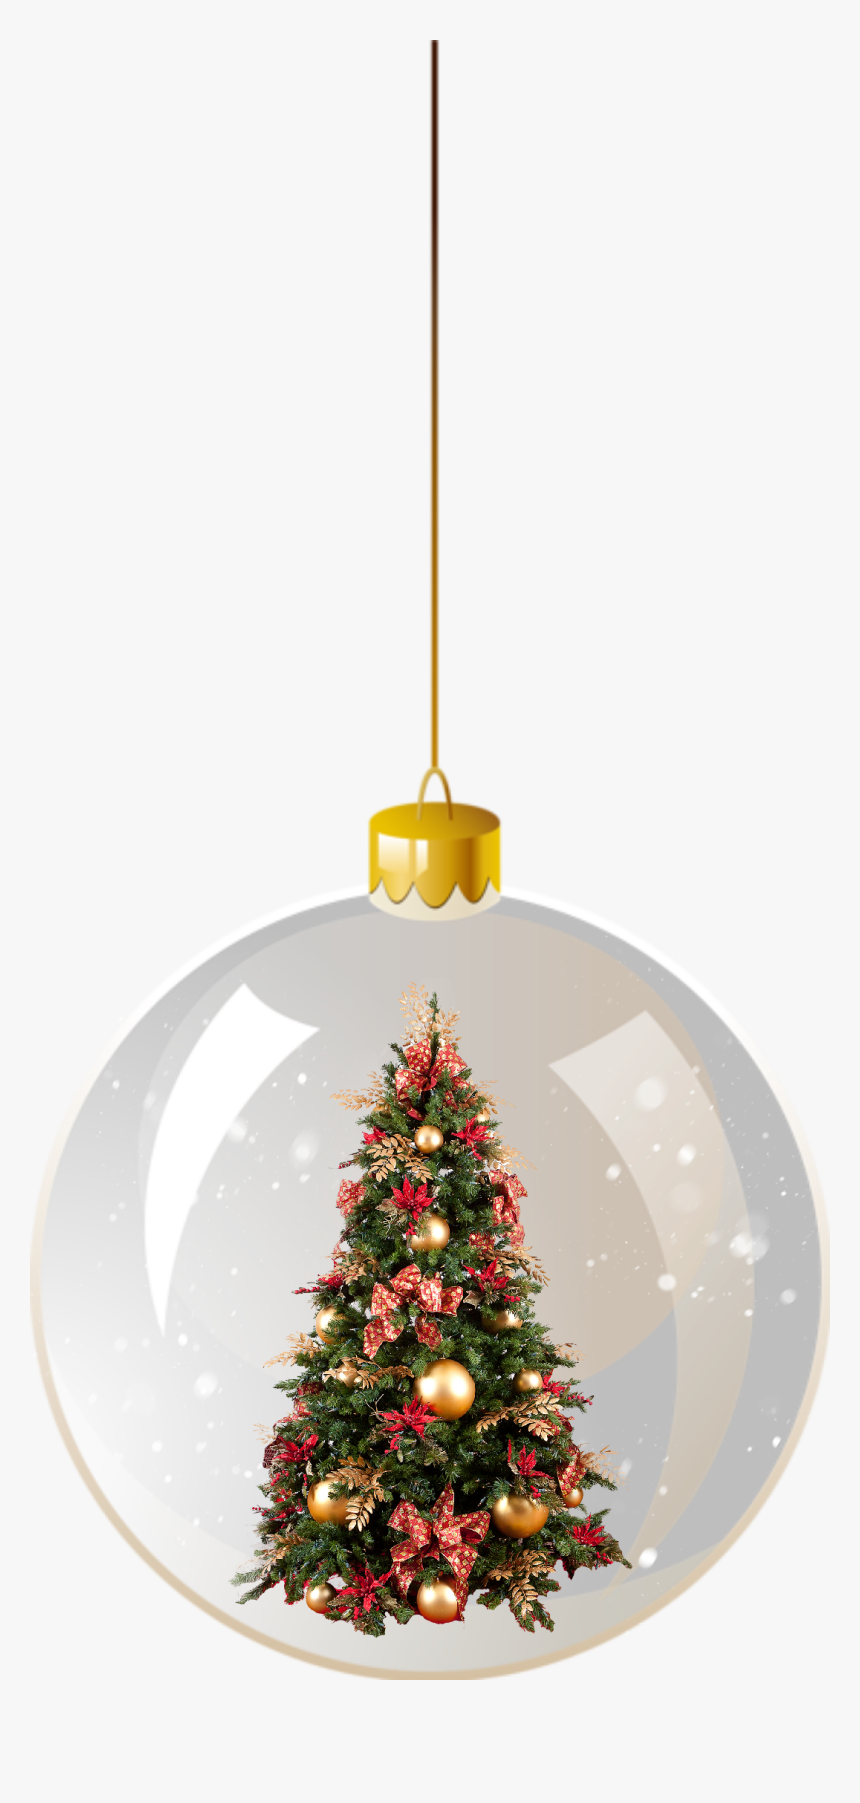 Decorated Christmas Tree Png, Transparent Png, Free Download